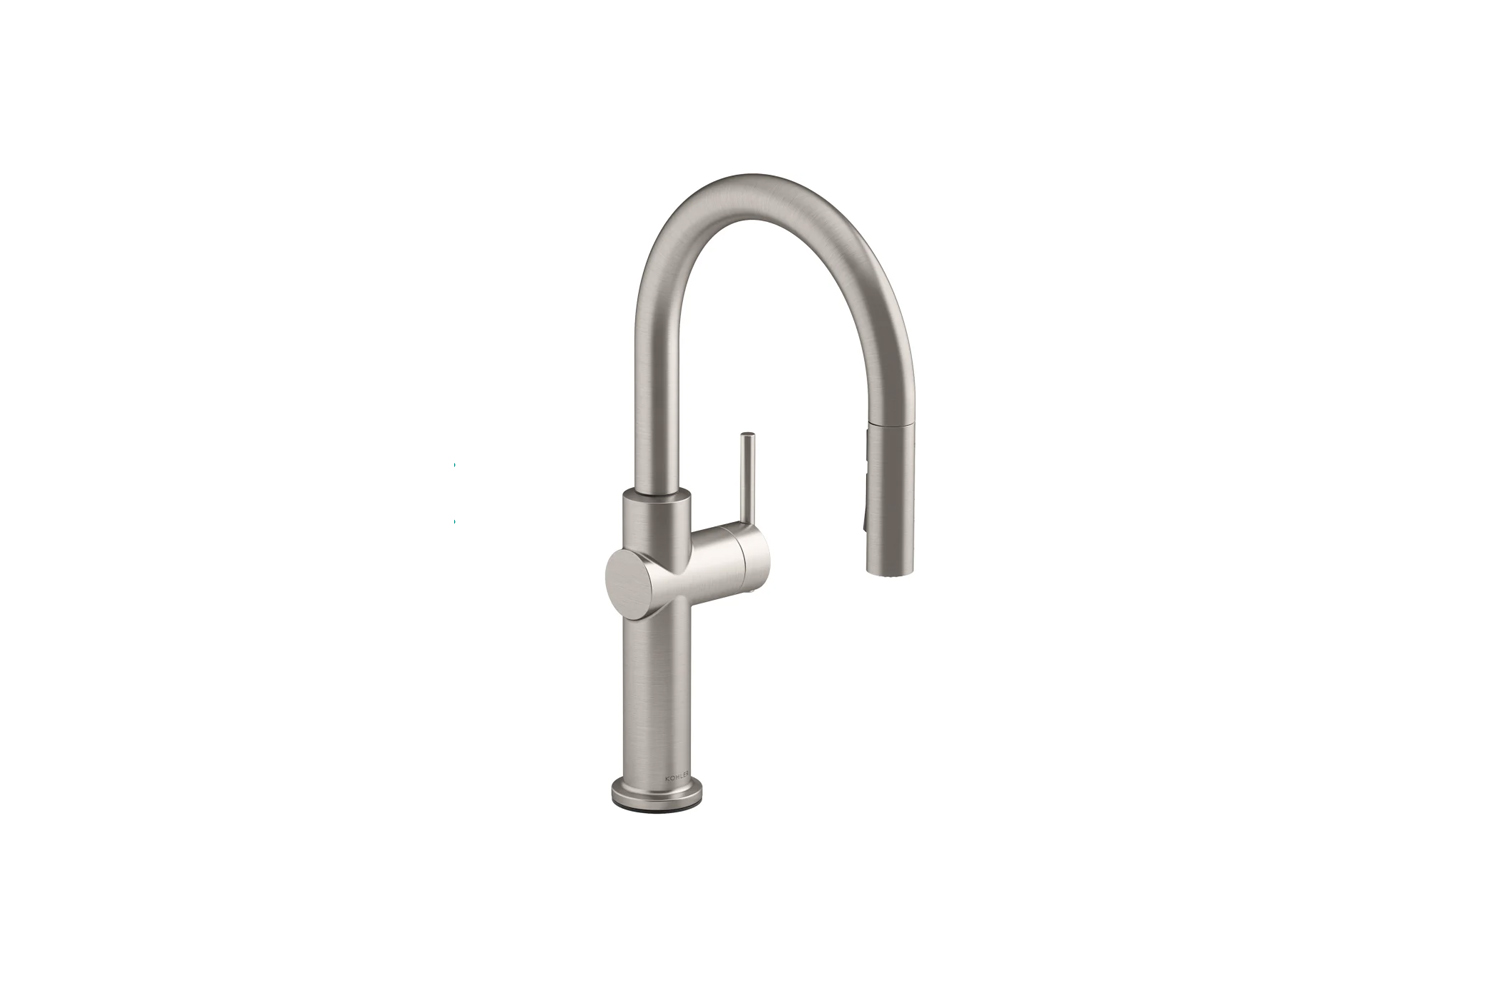 the kohler crue kitchen faucet in vibrant stainless is \$434.93 at build. 17